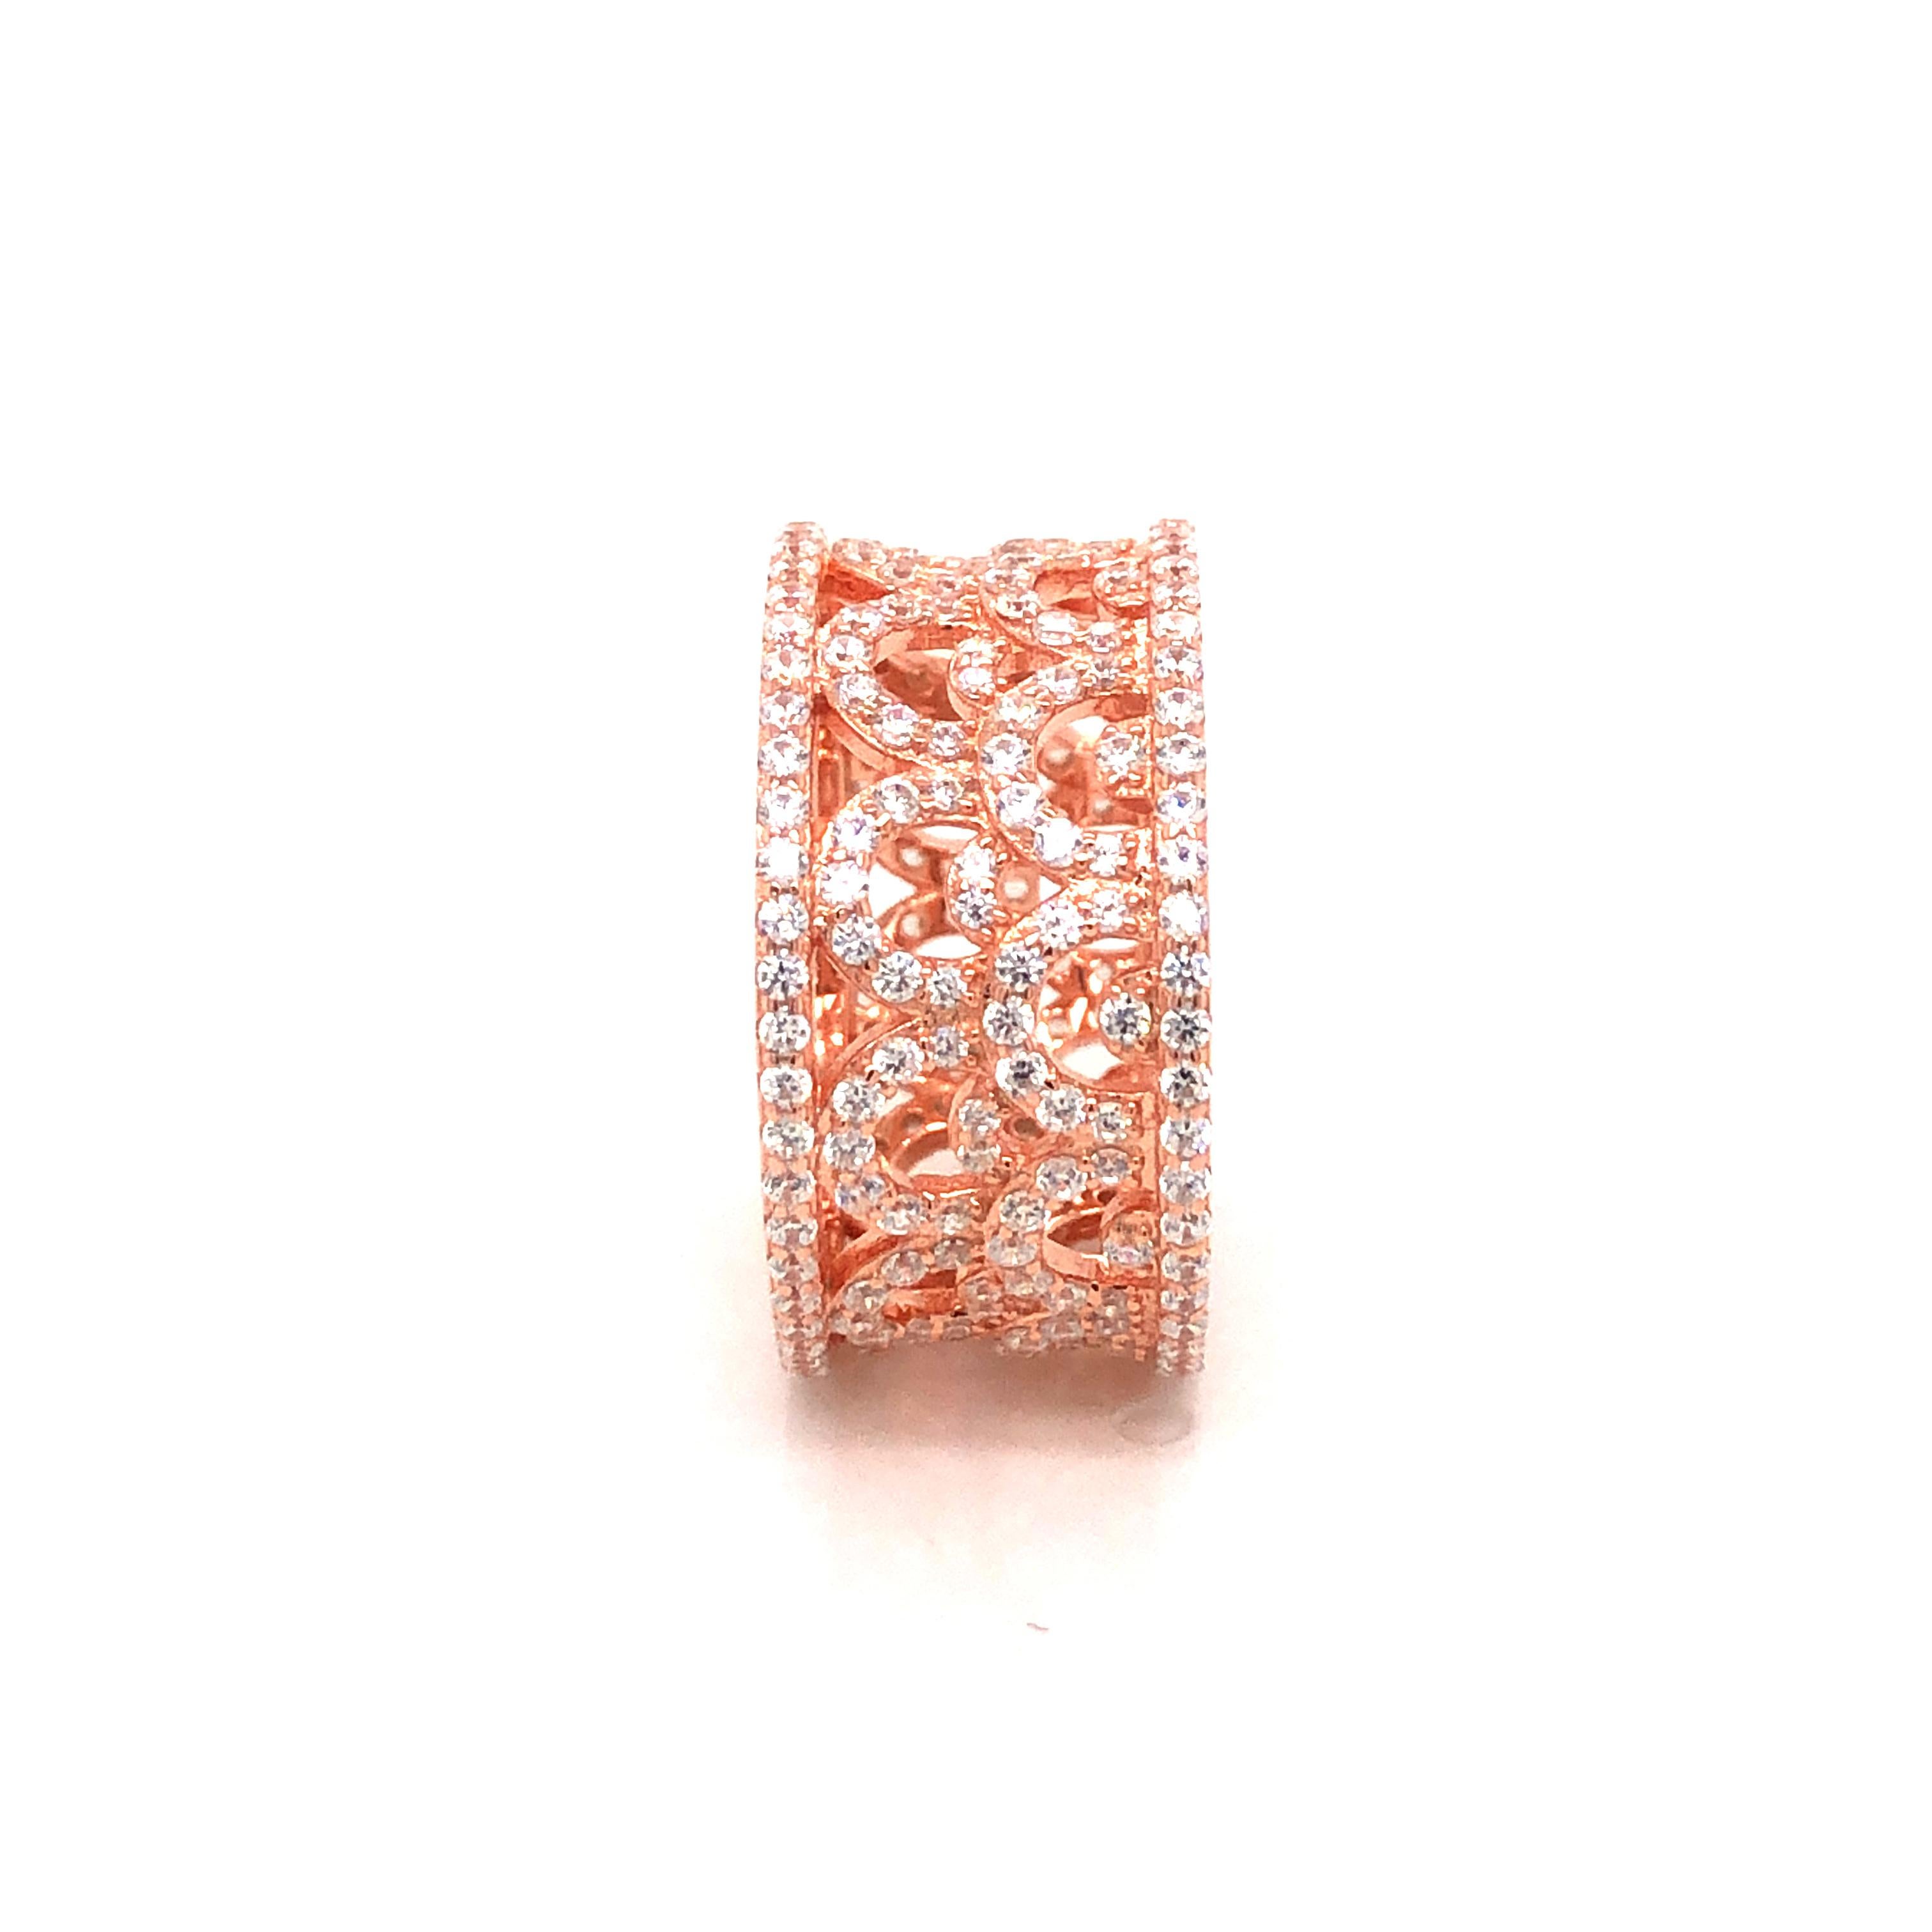 This intricately detailed women's wide eternity band features 3.40ct of round brilliant cut cubic zirconia.
The fashionably wide vintage design is set in 925 sterling silver and finished in either 14kt rose gold, 14kt yellow gold or high gloss white